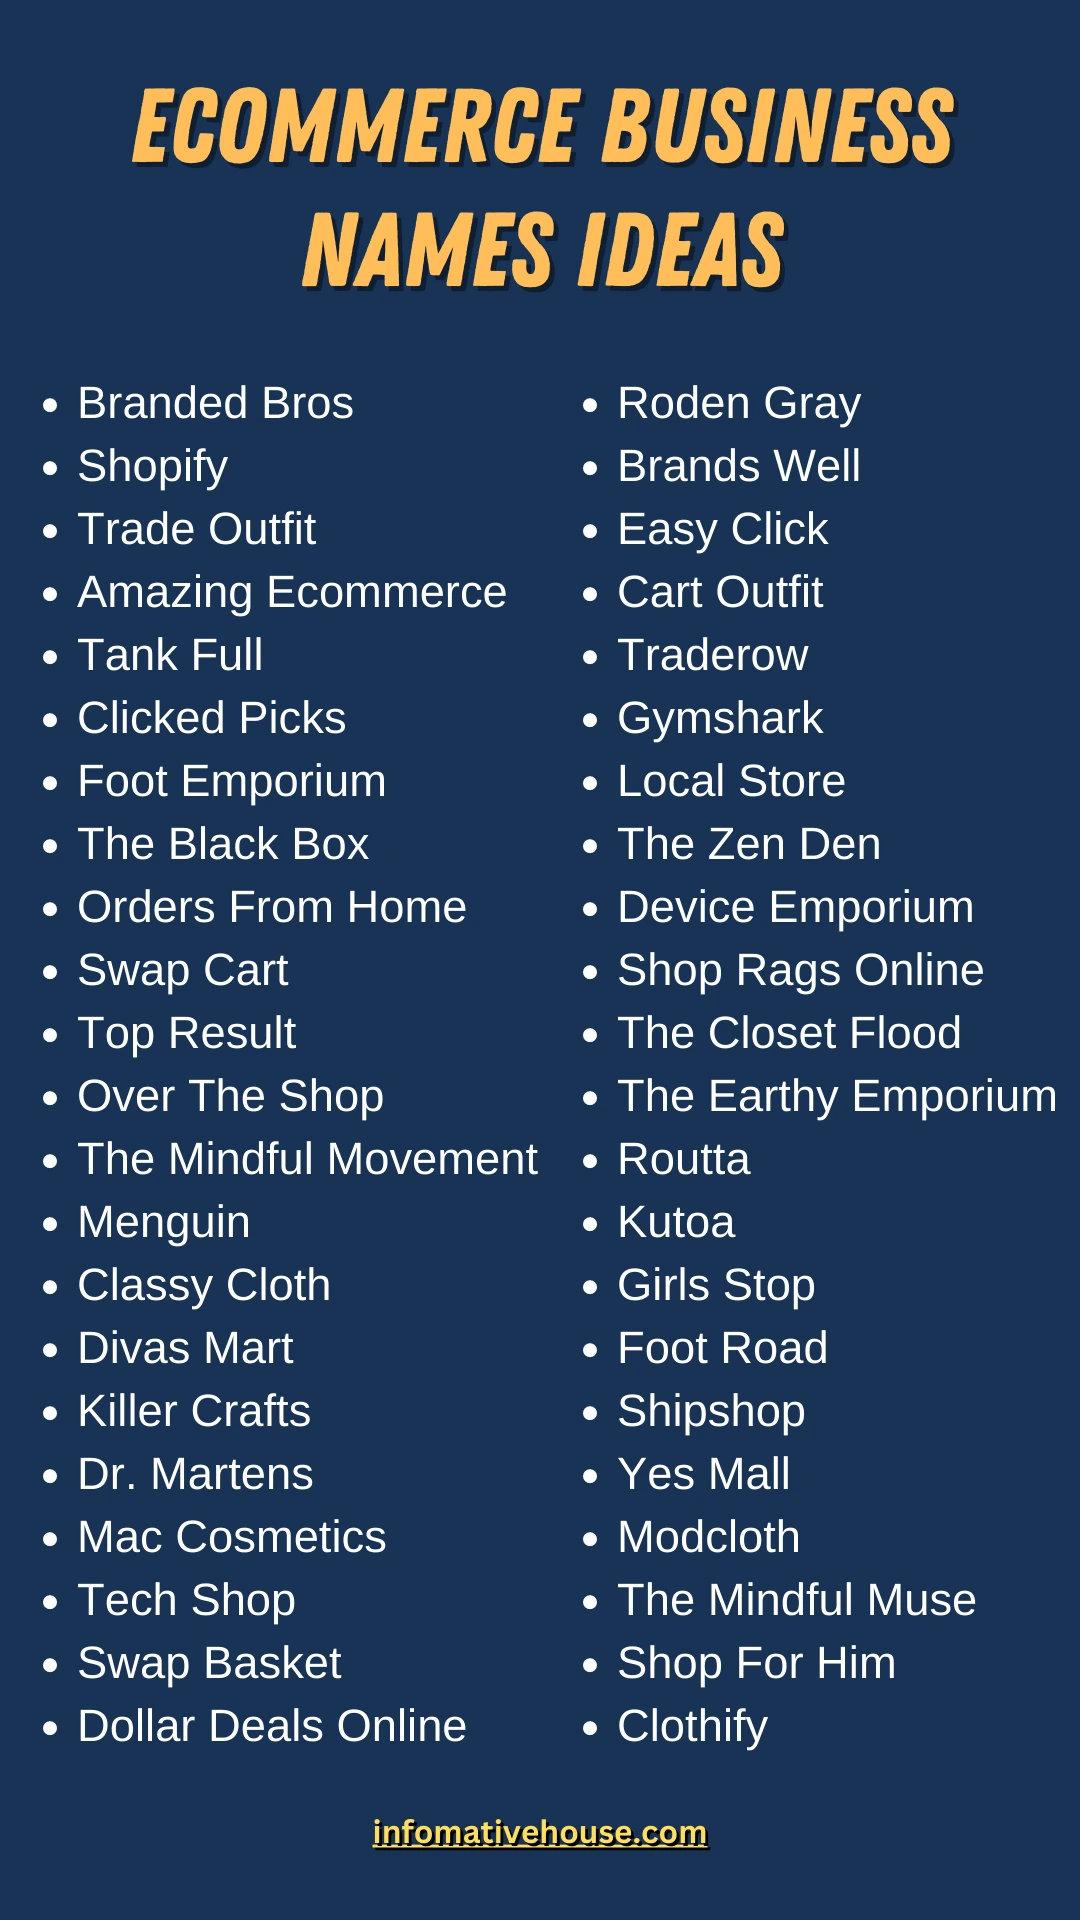 Ecommerce Business Names Ideas